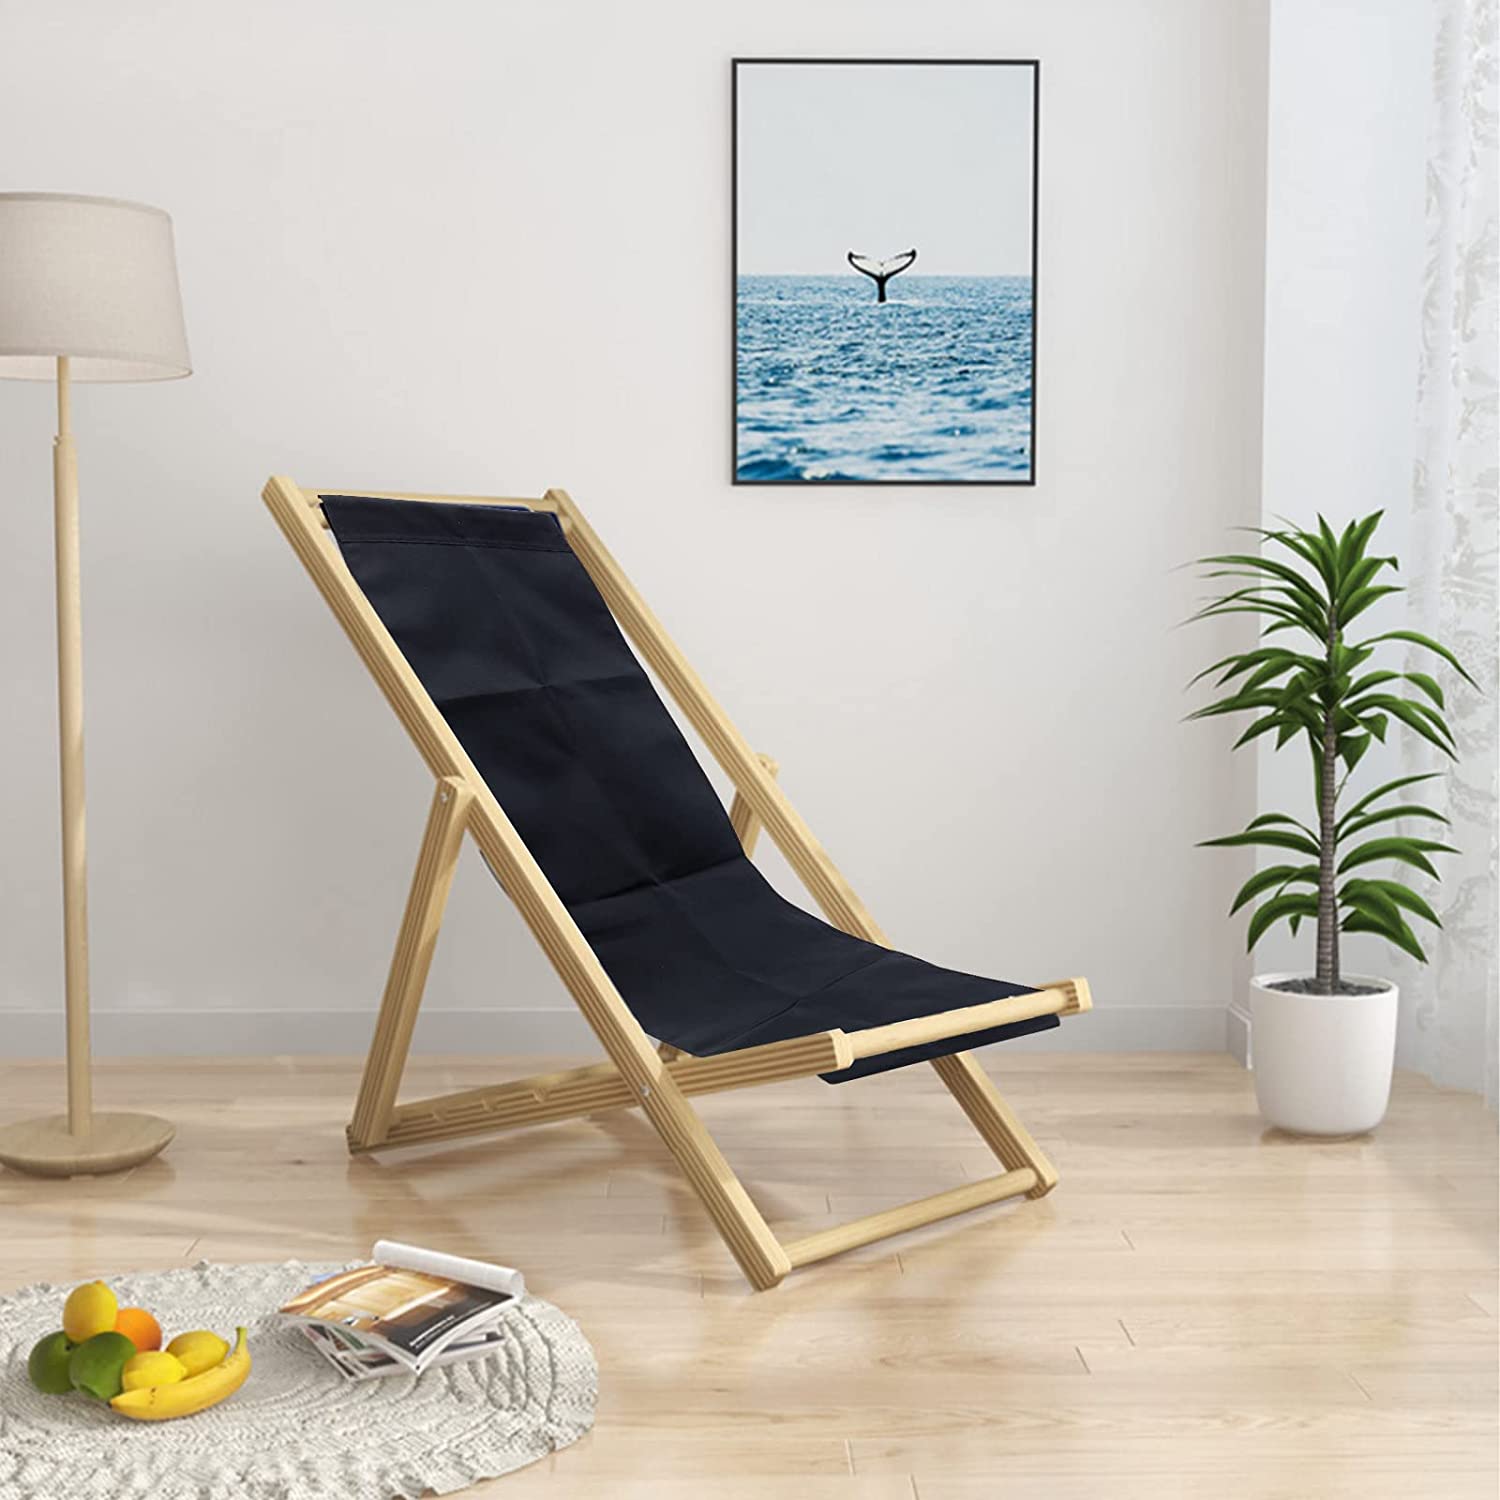 Beach Sling Chair Replacement Fabric Black Casual Simple Beach Chair Replacement Oxford Cloth for Home Beach Chair Protect Replacement (44.69x17.13inch) - image 3 of 5